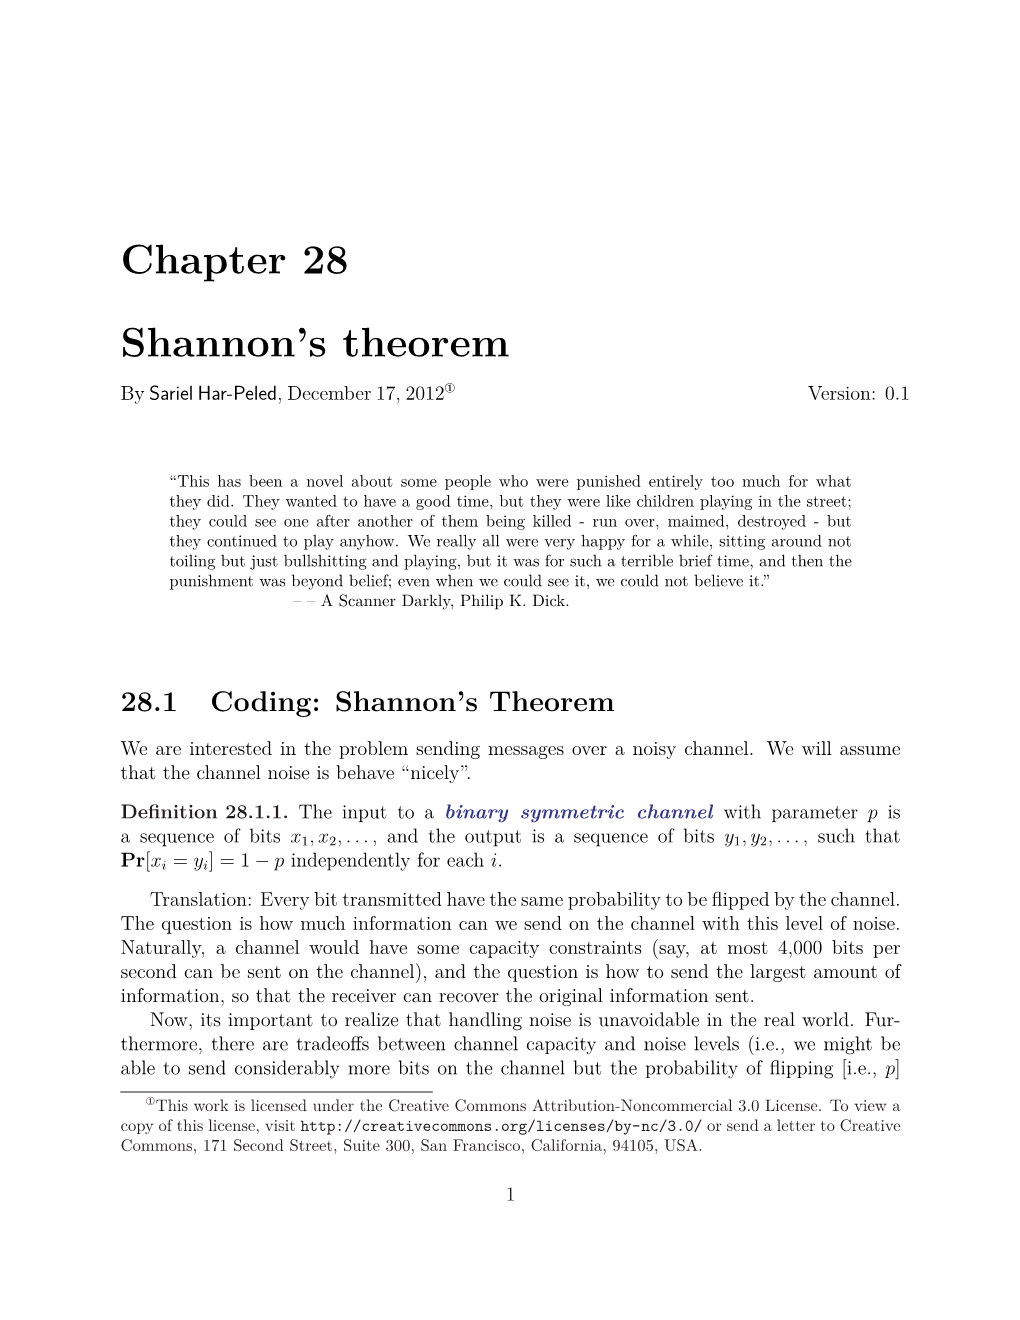 Chapter 28 Shannon's Theorem